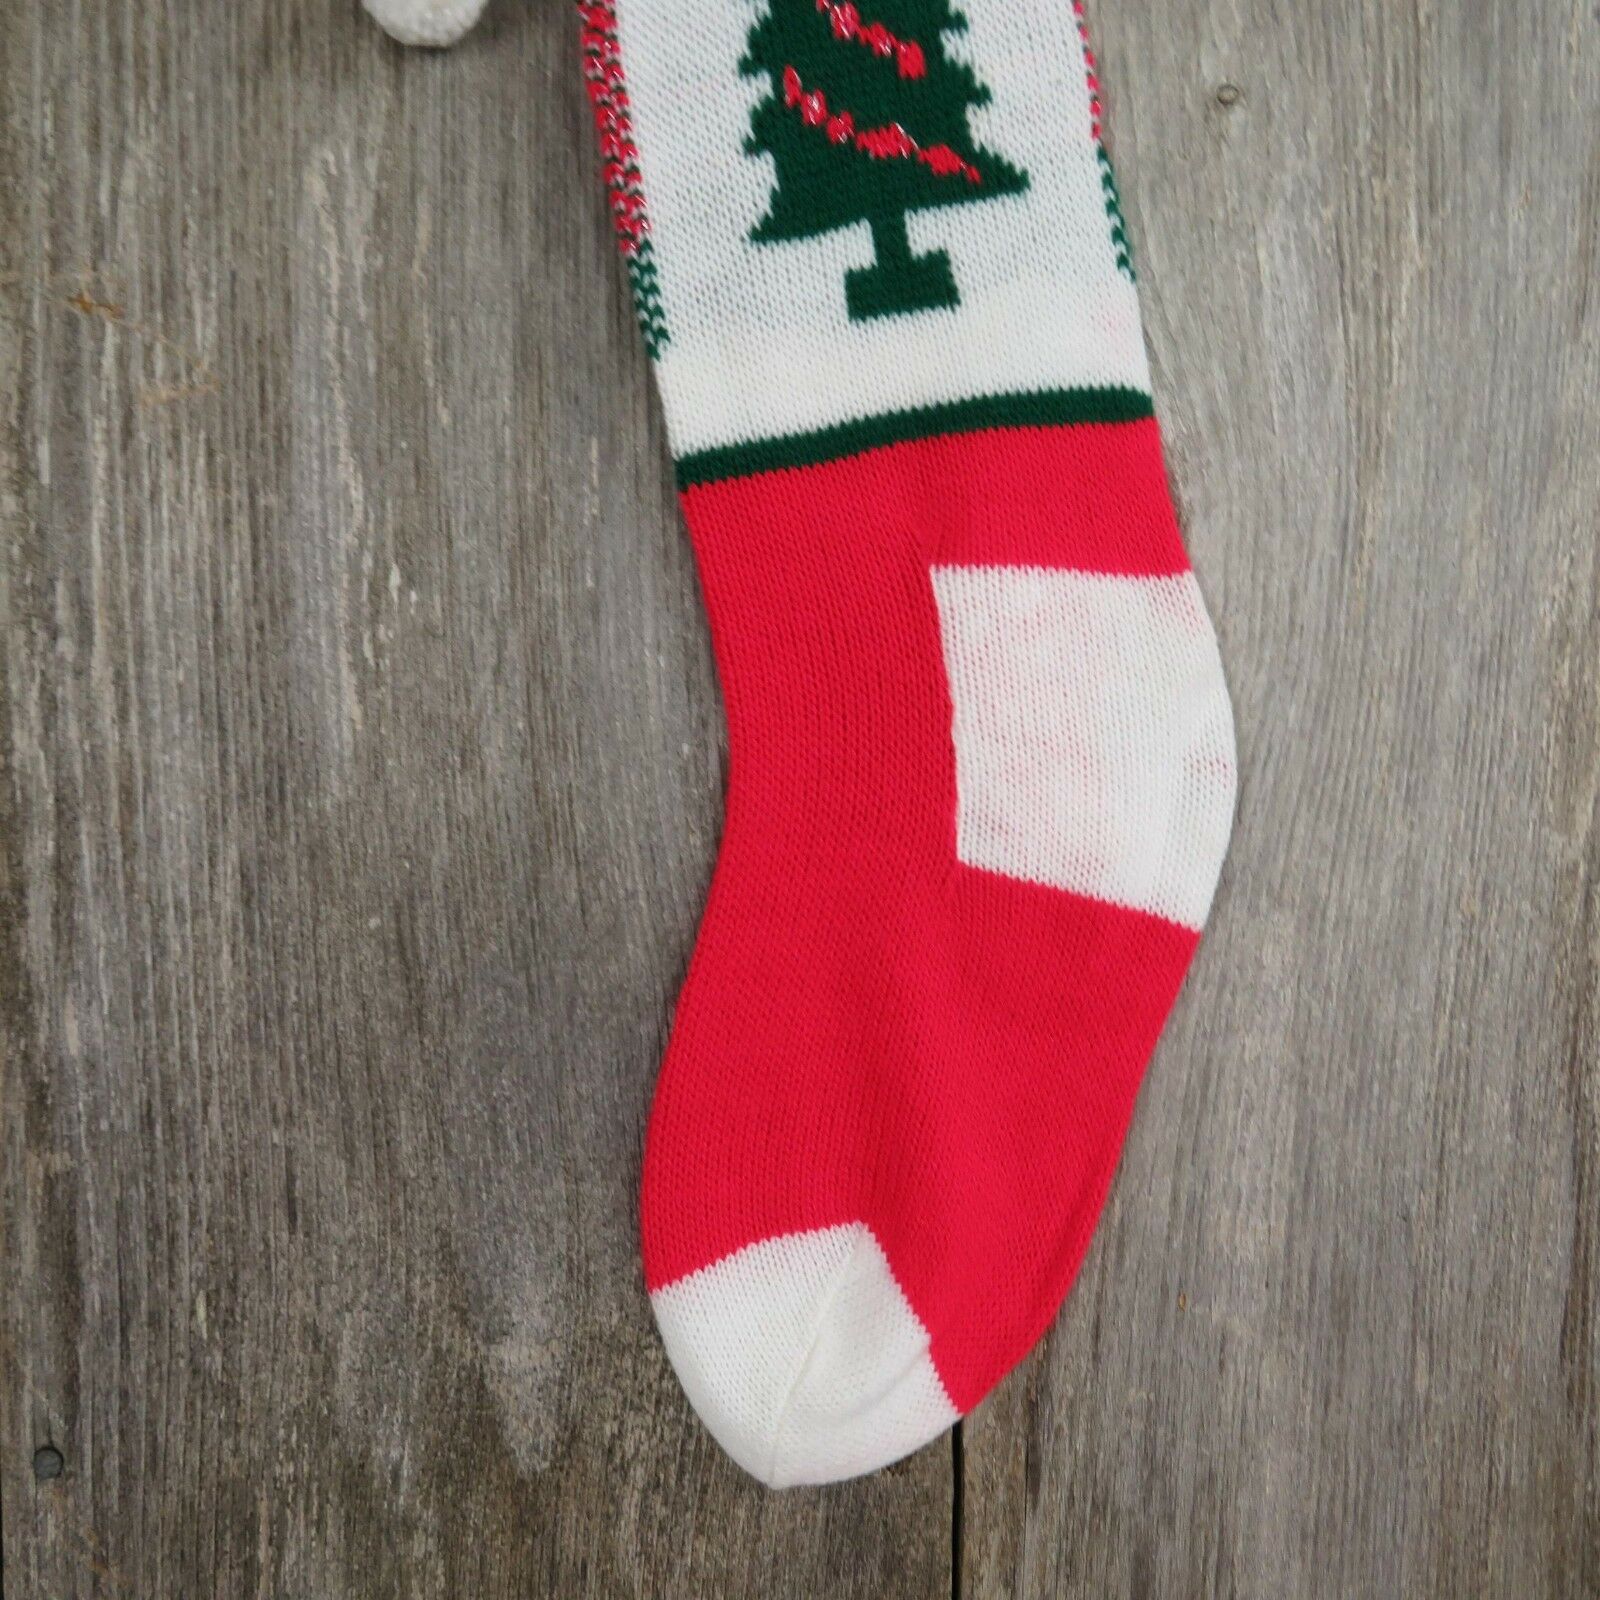 Vintage Christmas Tree Stocking Knitted Knit Peace White Red Green ST58 - At Grandma's Table